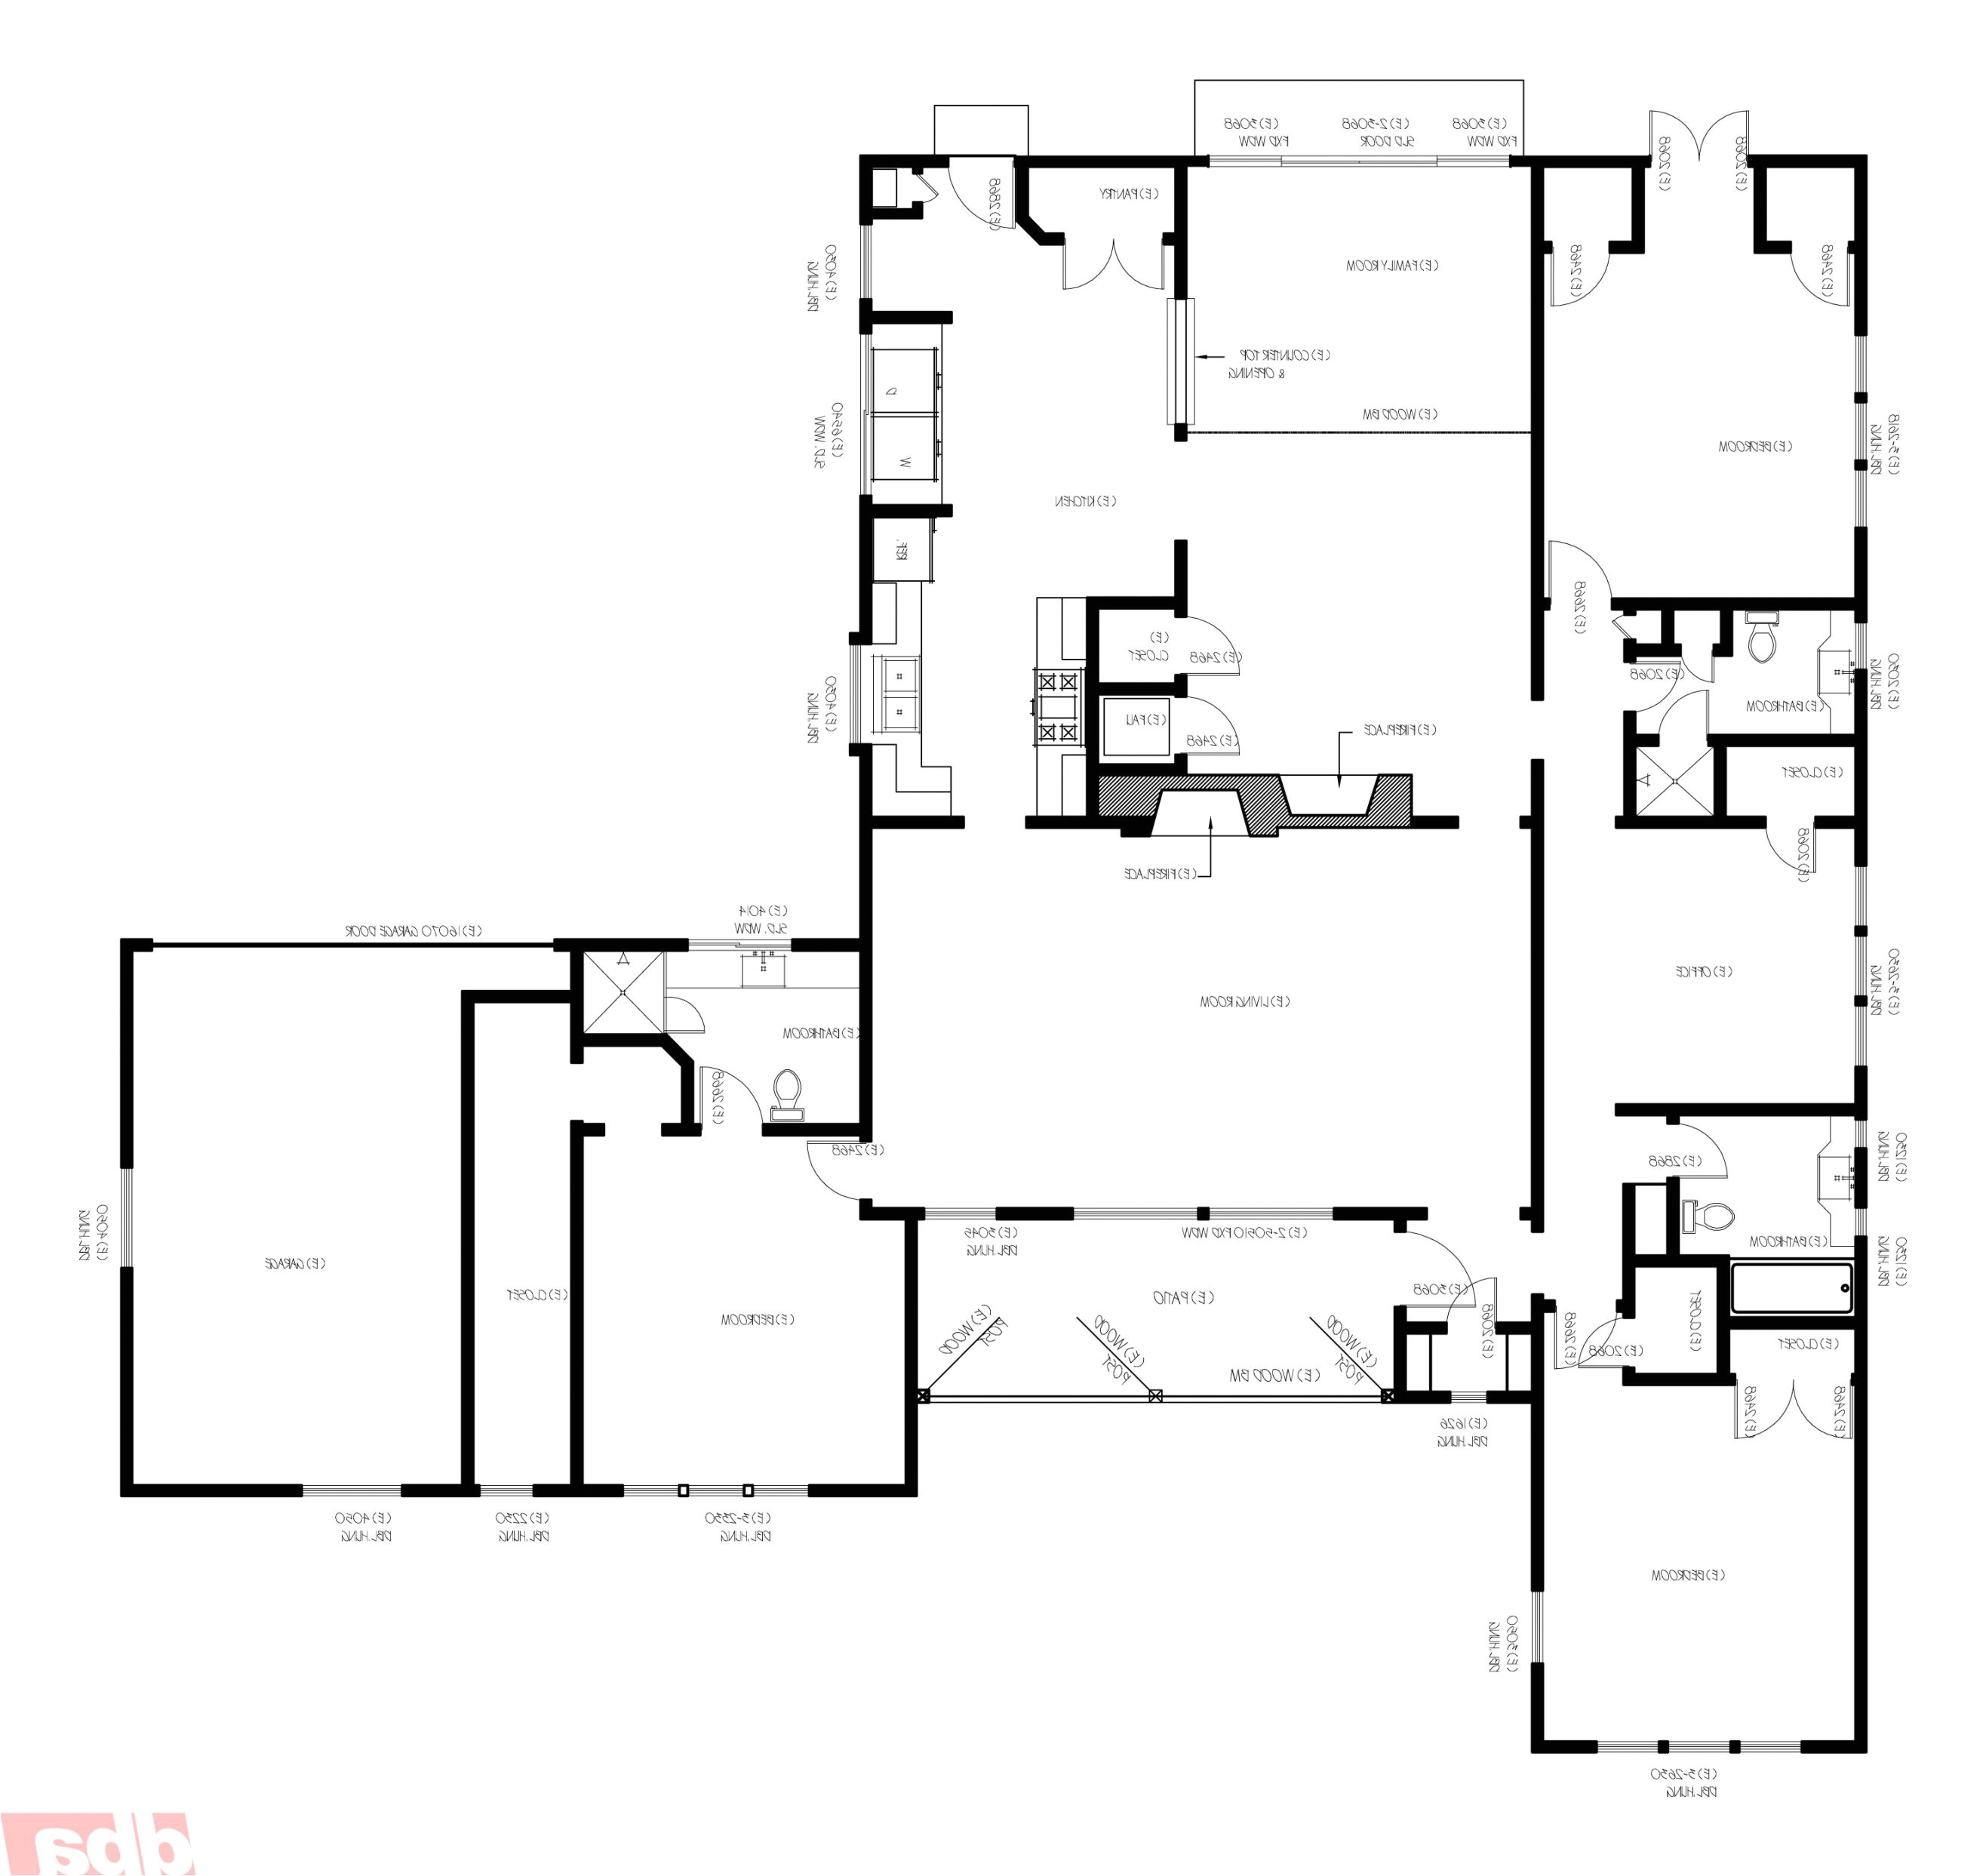 676931 how do you find floor plans on an existing home